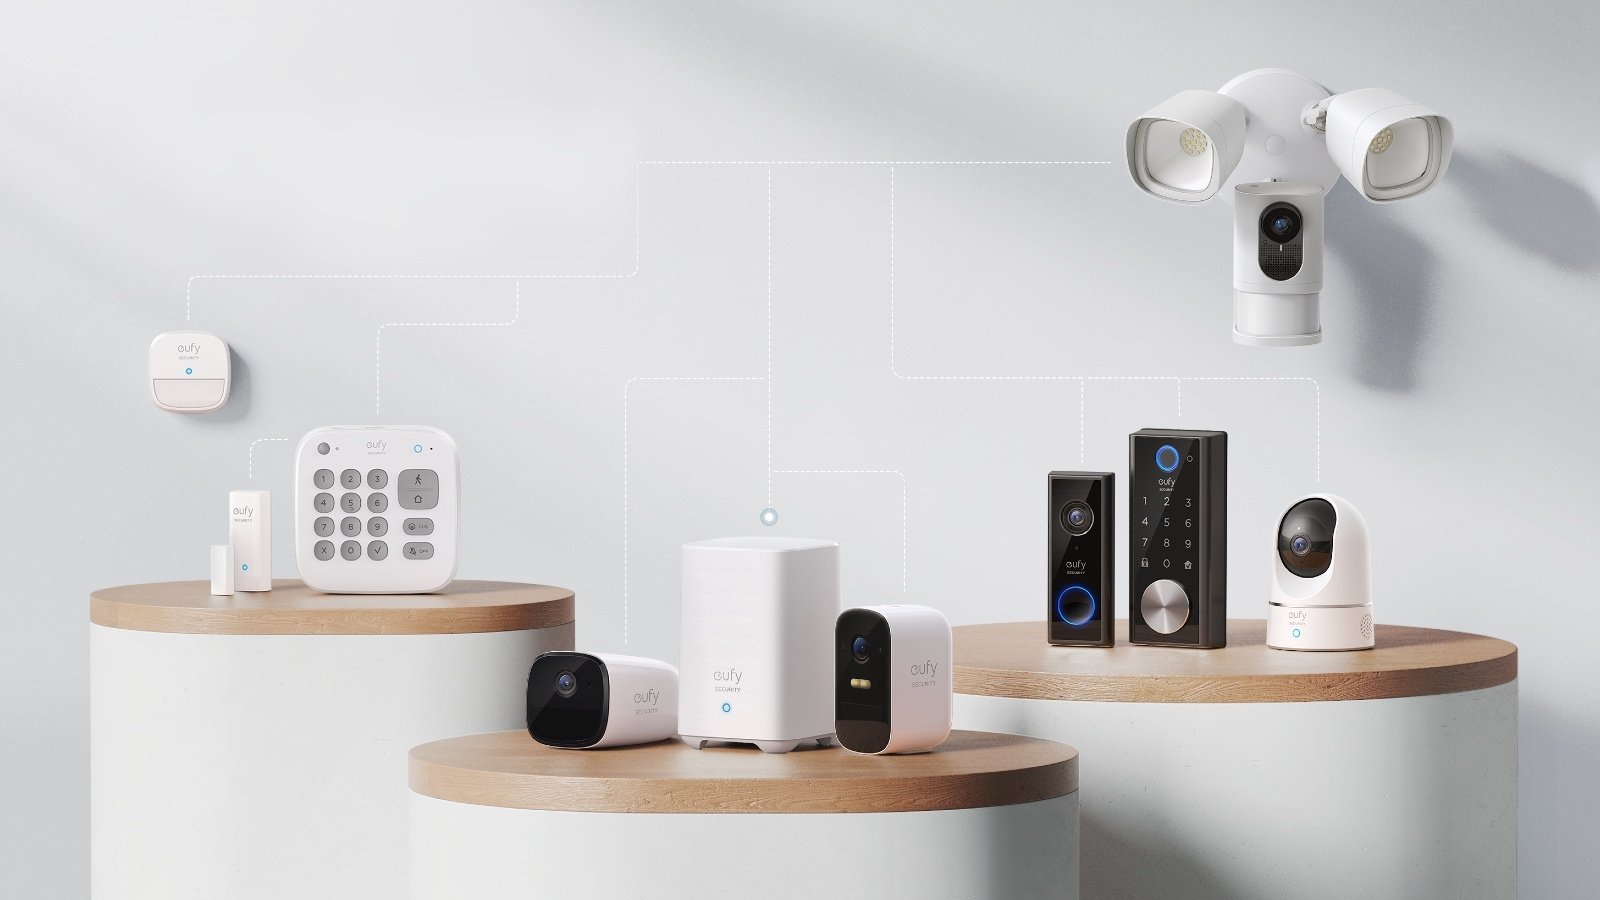 anker-eufy-smart-home-hubs-exposed-to-rce-attacks-by-critical-flaw